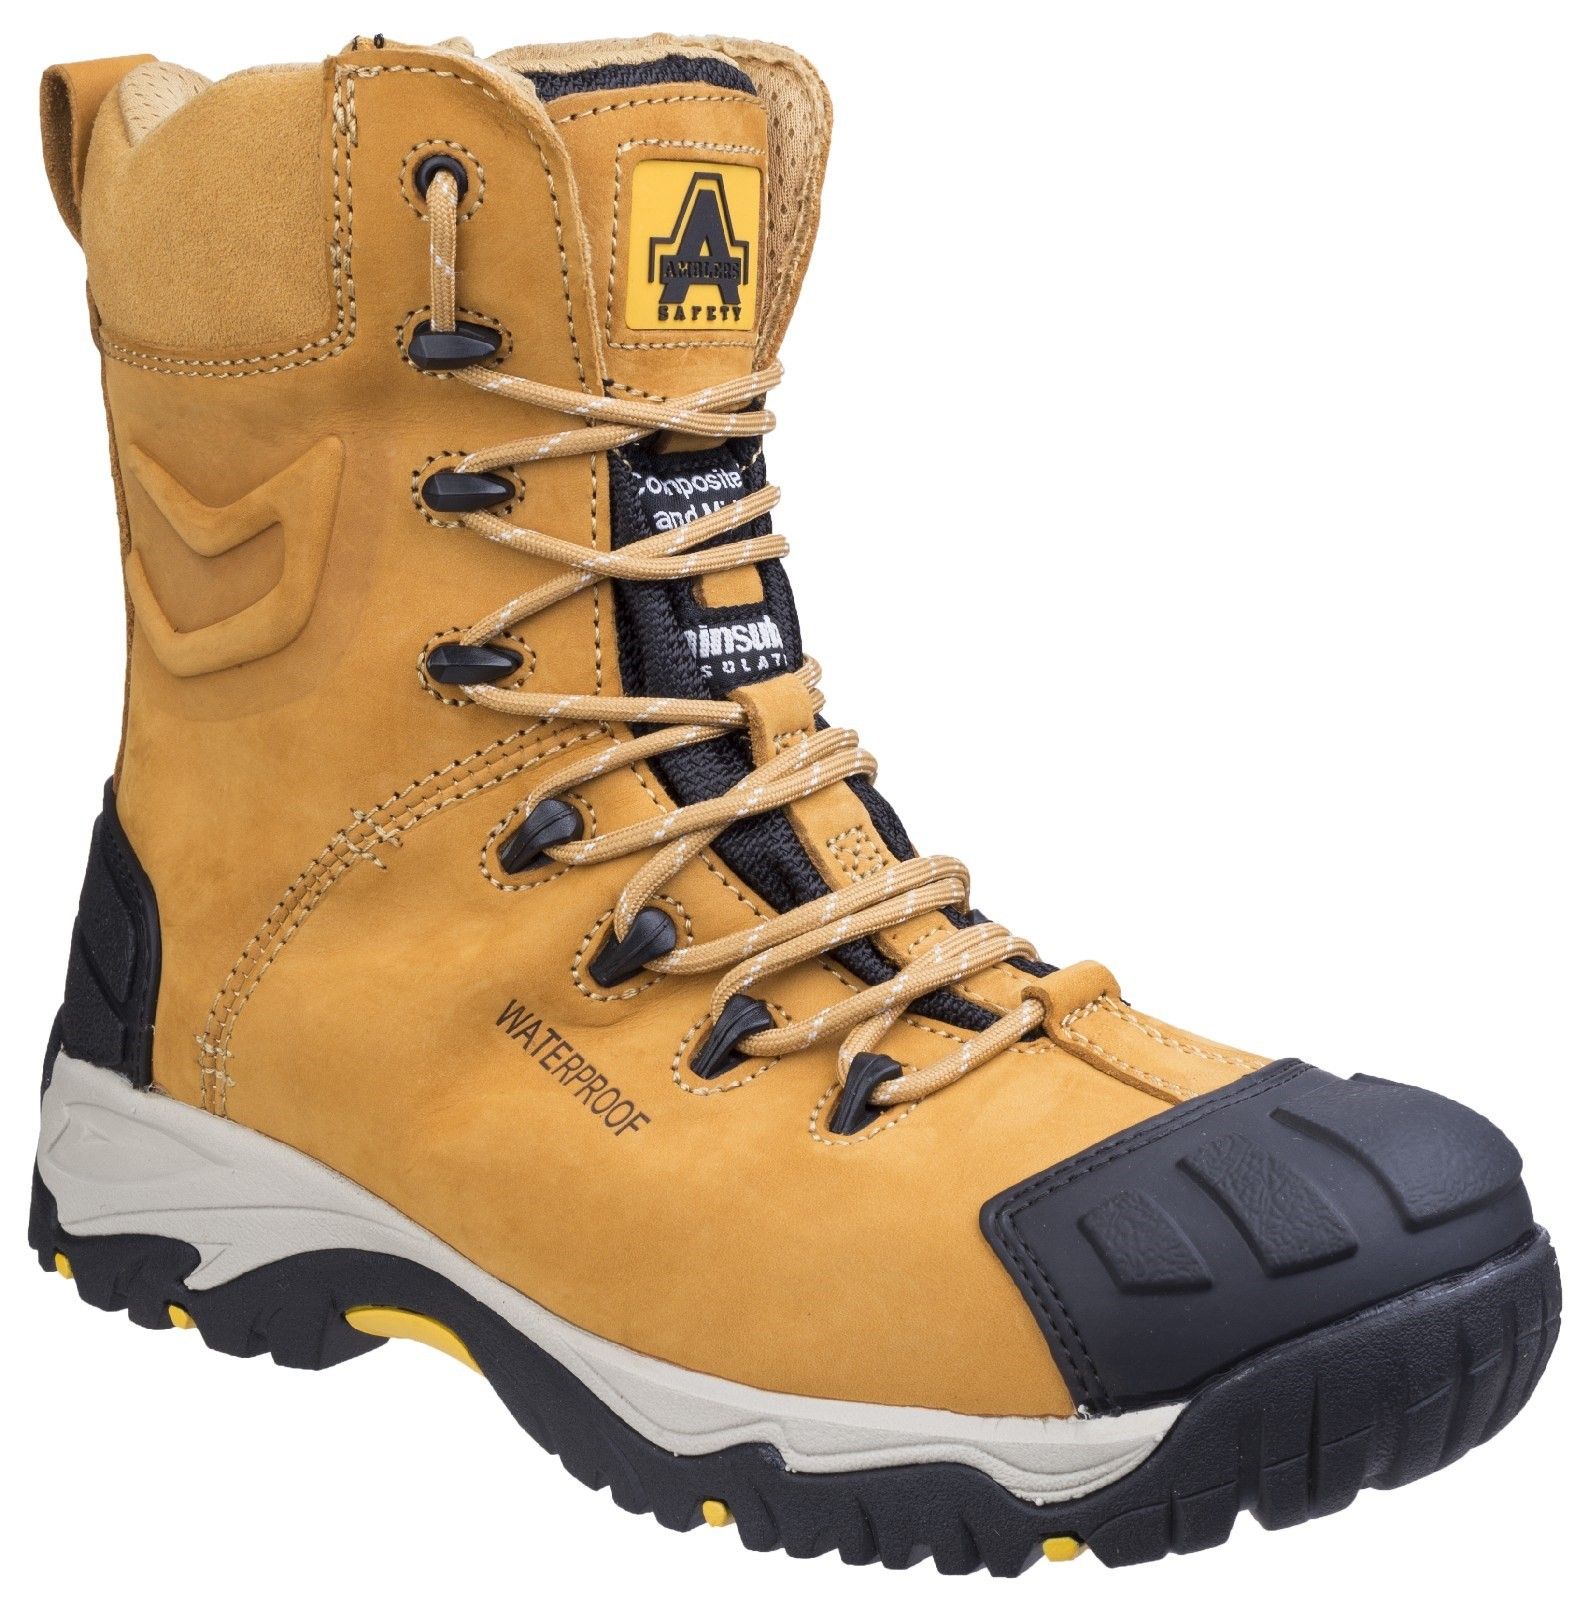 A hard wearing premium safety boot with breathable waterproof lining, metal free toe cap, penetration protection, SRC slip resistance and 200g thinsulate.Fully waterproof composite safety boot. 
Breathable Waterproof Membrane & Mesh Lining. 
Water resistant nubuck leather upper. 
Thinsulate lining and temperature resistant outsole. 
YKK Metal Side Zip.